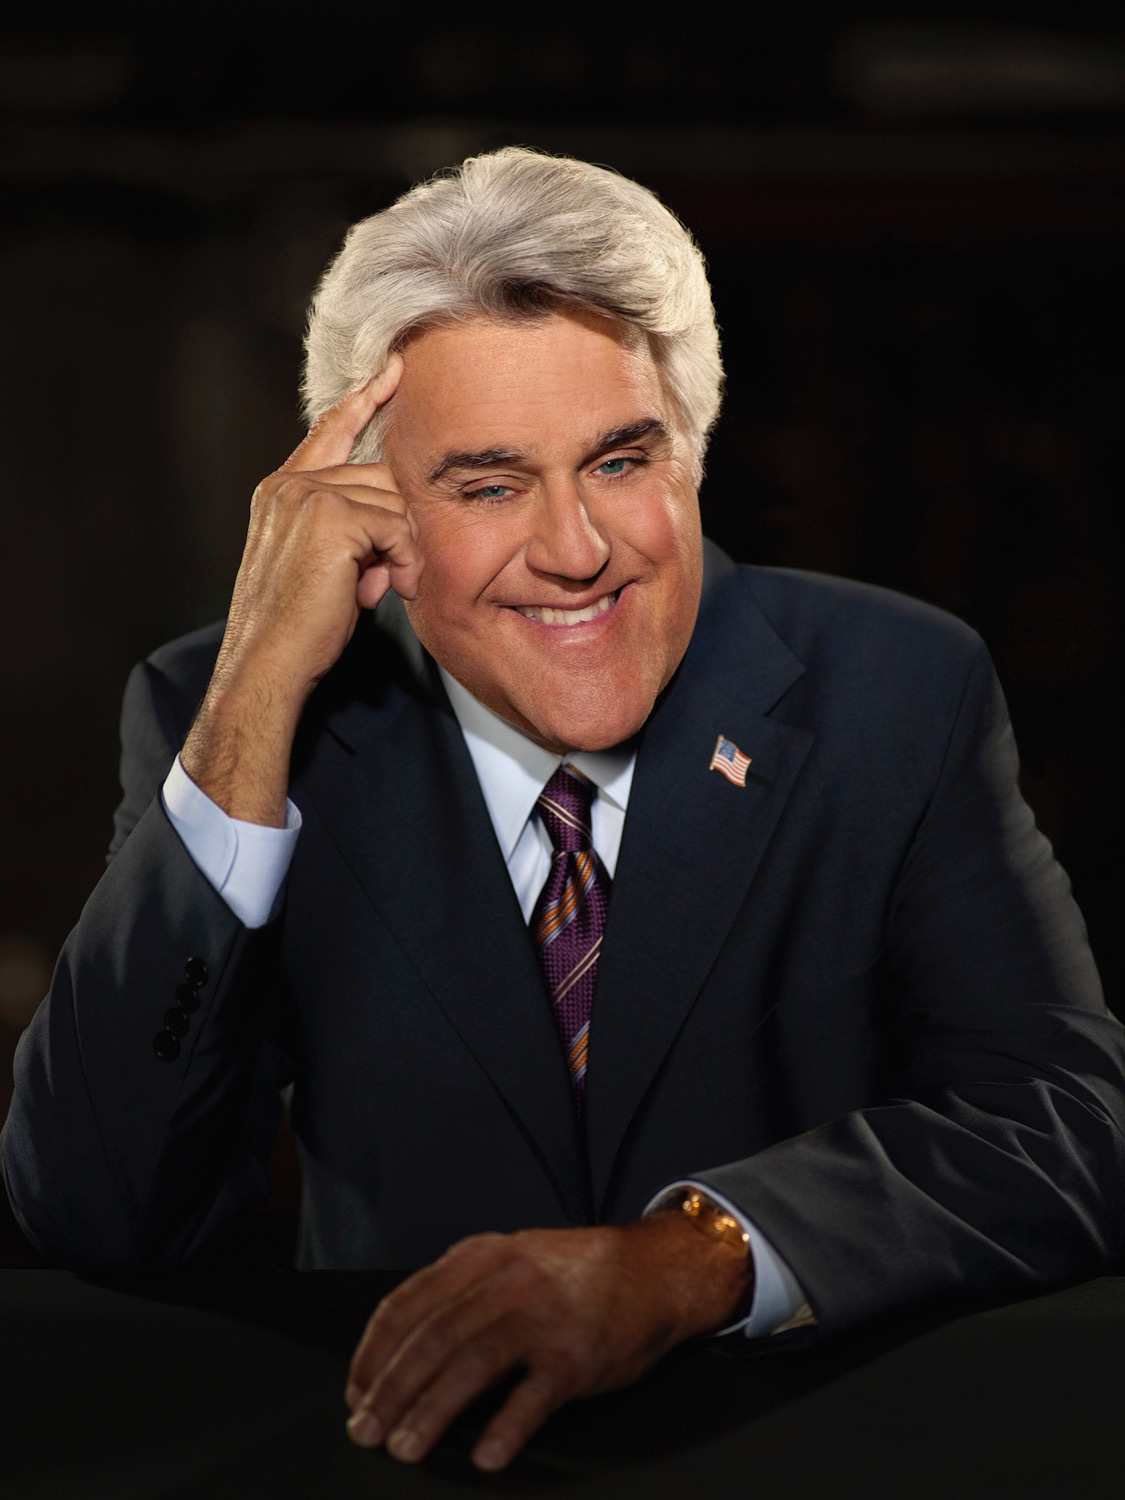 Comedian Jay Leno performs at WHBPAC on July 23. COURTESY WHBPAC